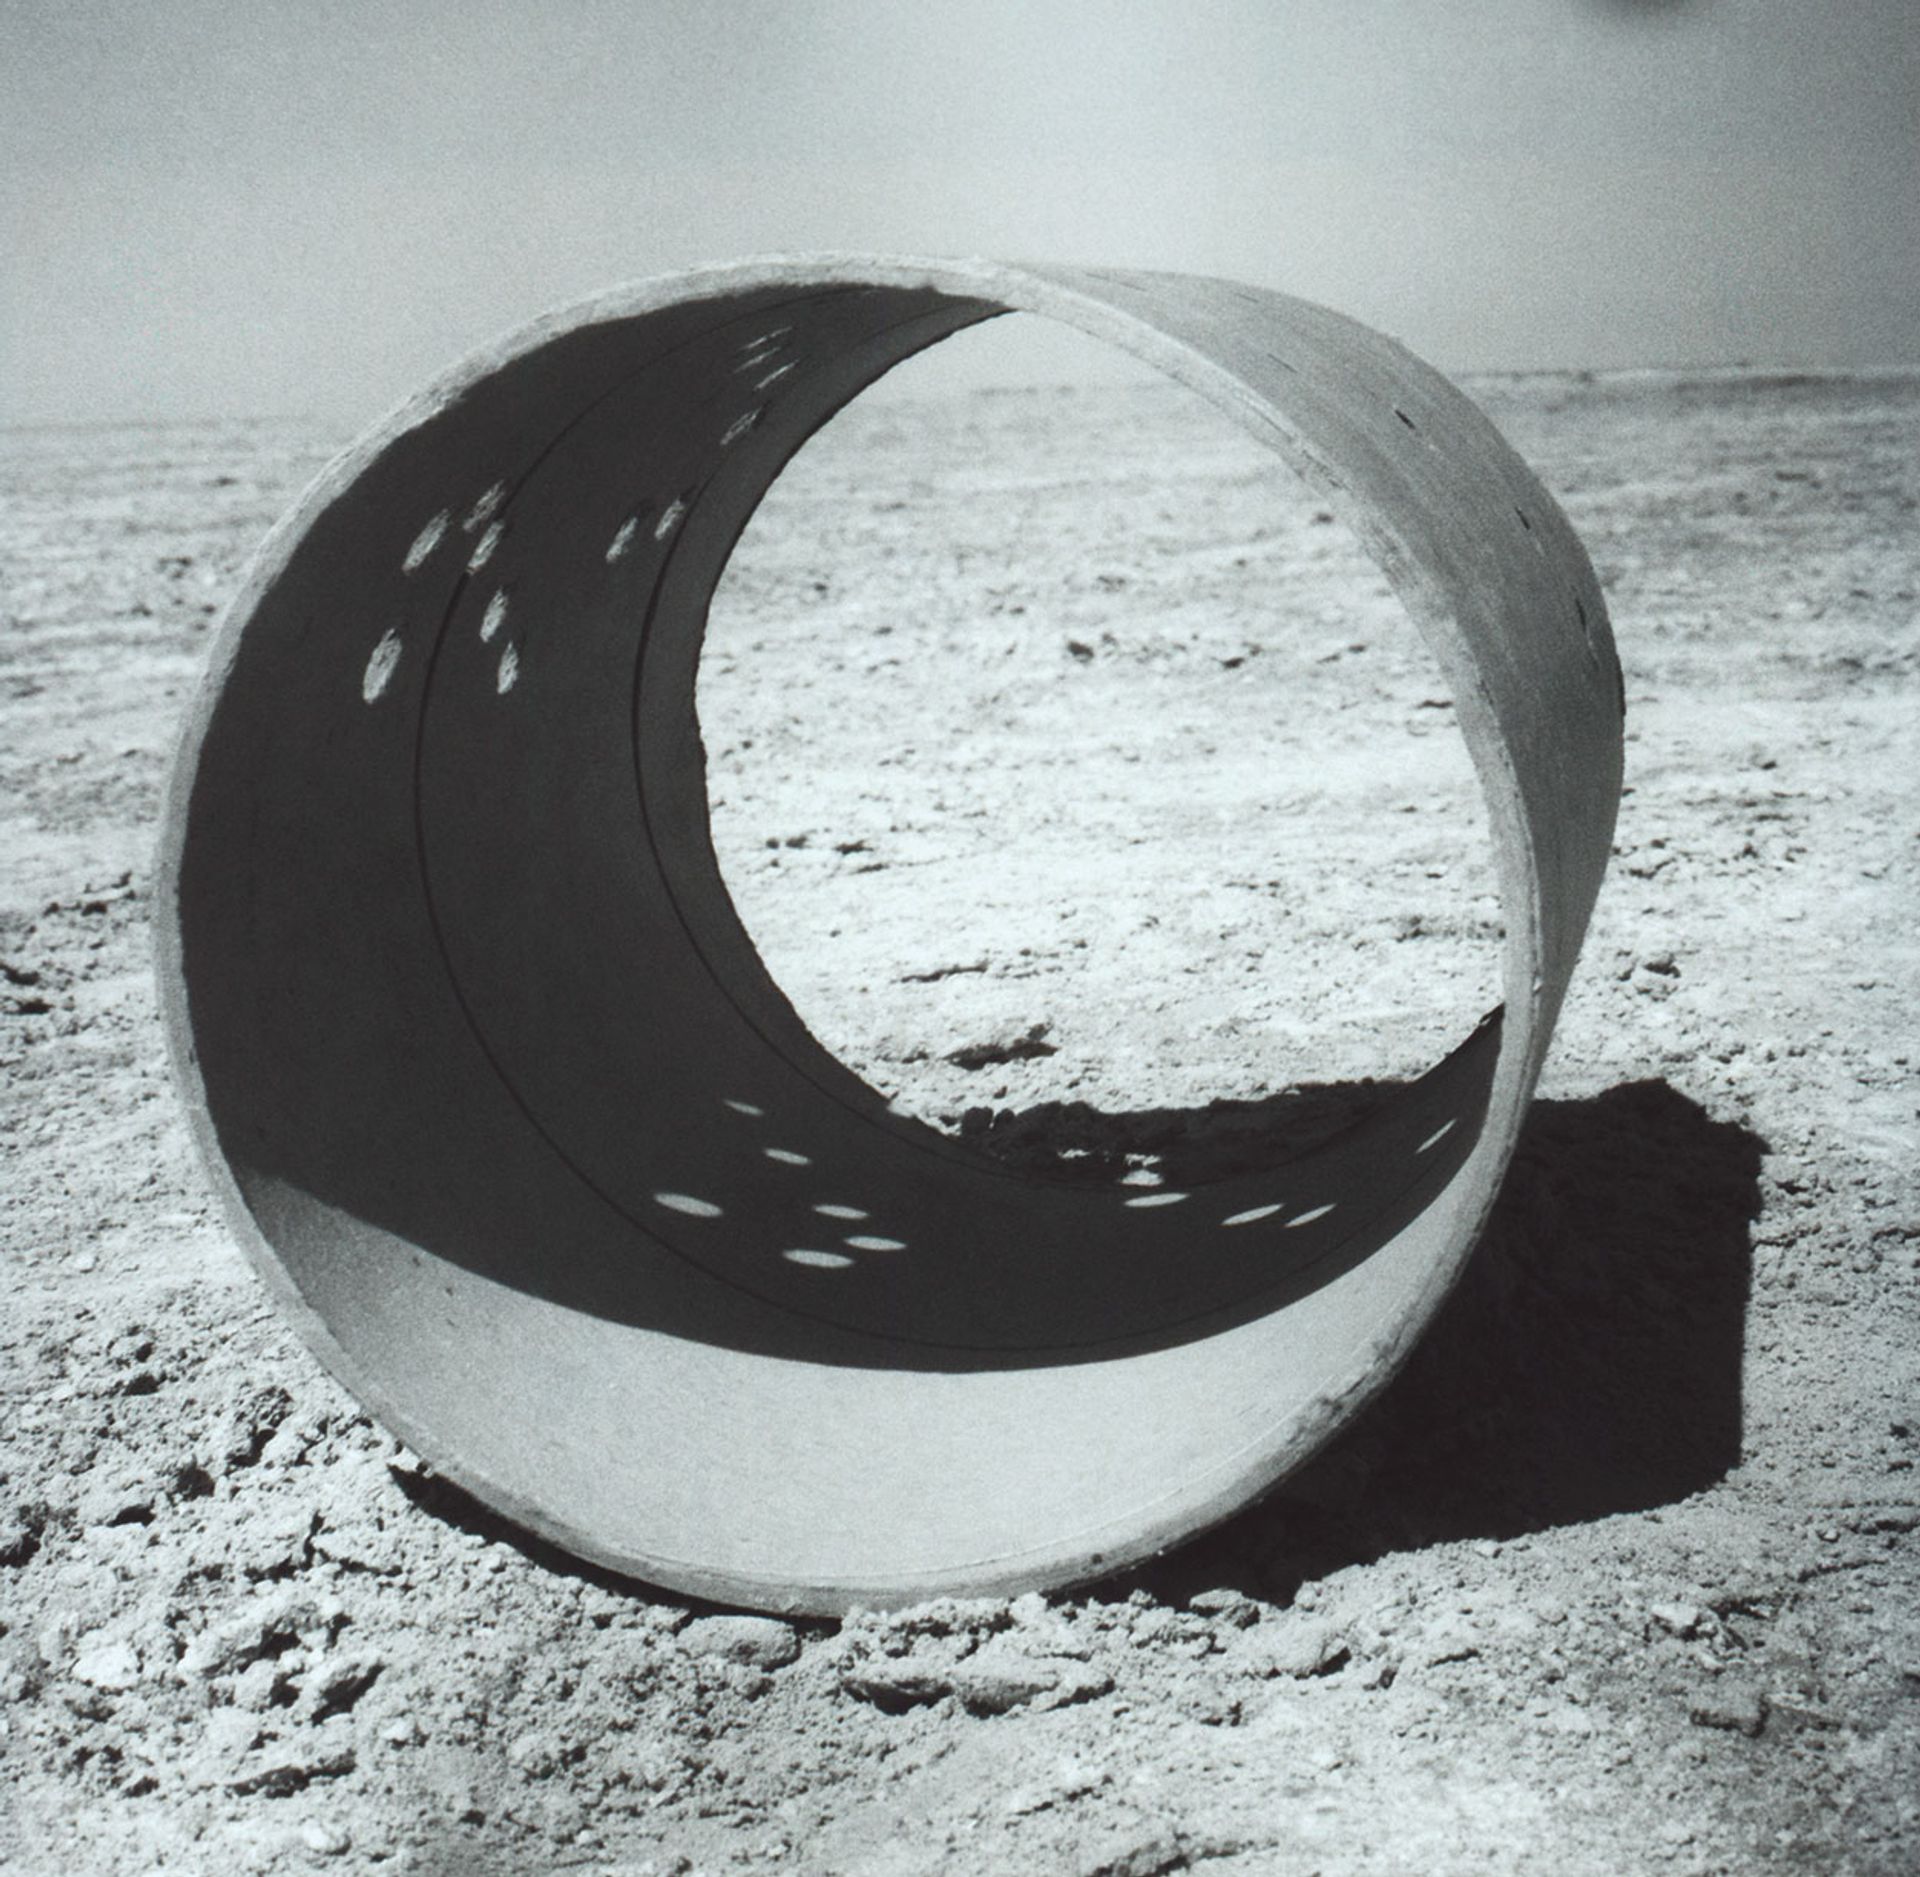 A 1975 photo study of one of Holt’s Sun Tunnels. She built the series of structures in the Great Basin Desert, Utah, between 1973 and 1976. During her five-decade career, she received less attention than her male counterparts, including her husband Robert Smithson © Holt/Smithson Foundation, Licensed by Artists Rights Society, New York